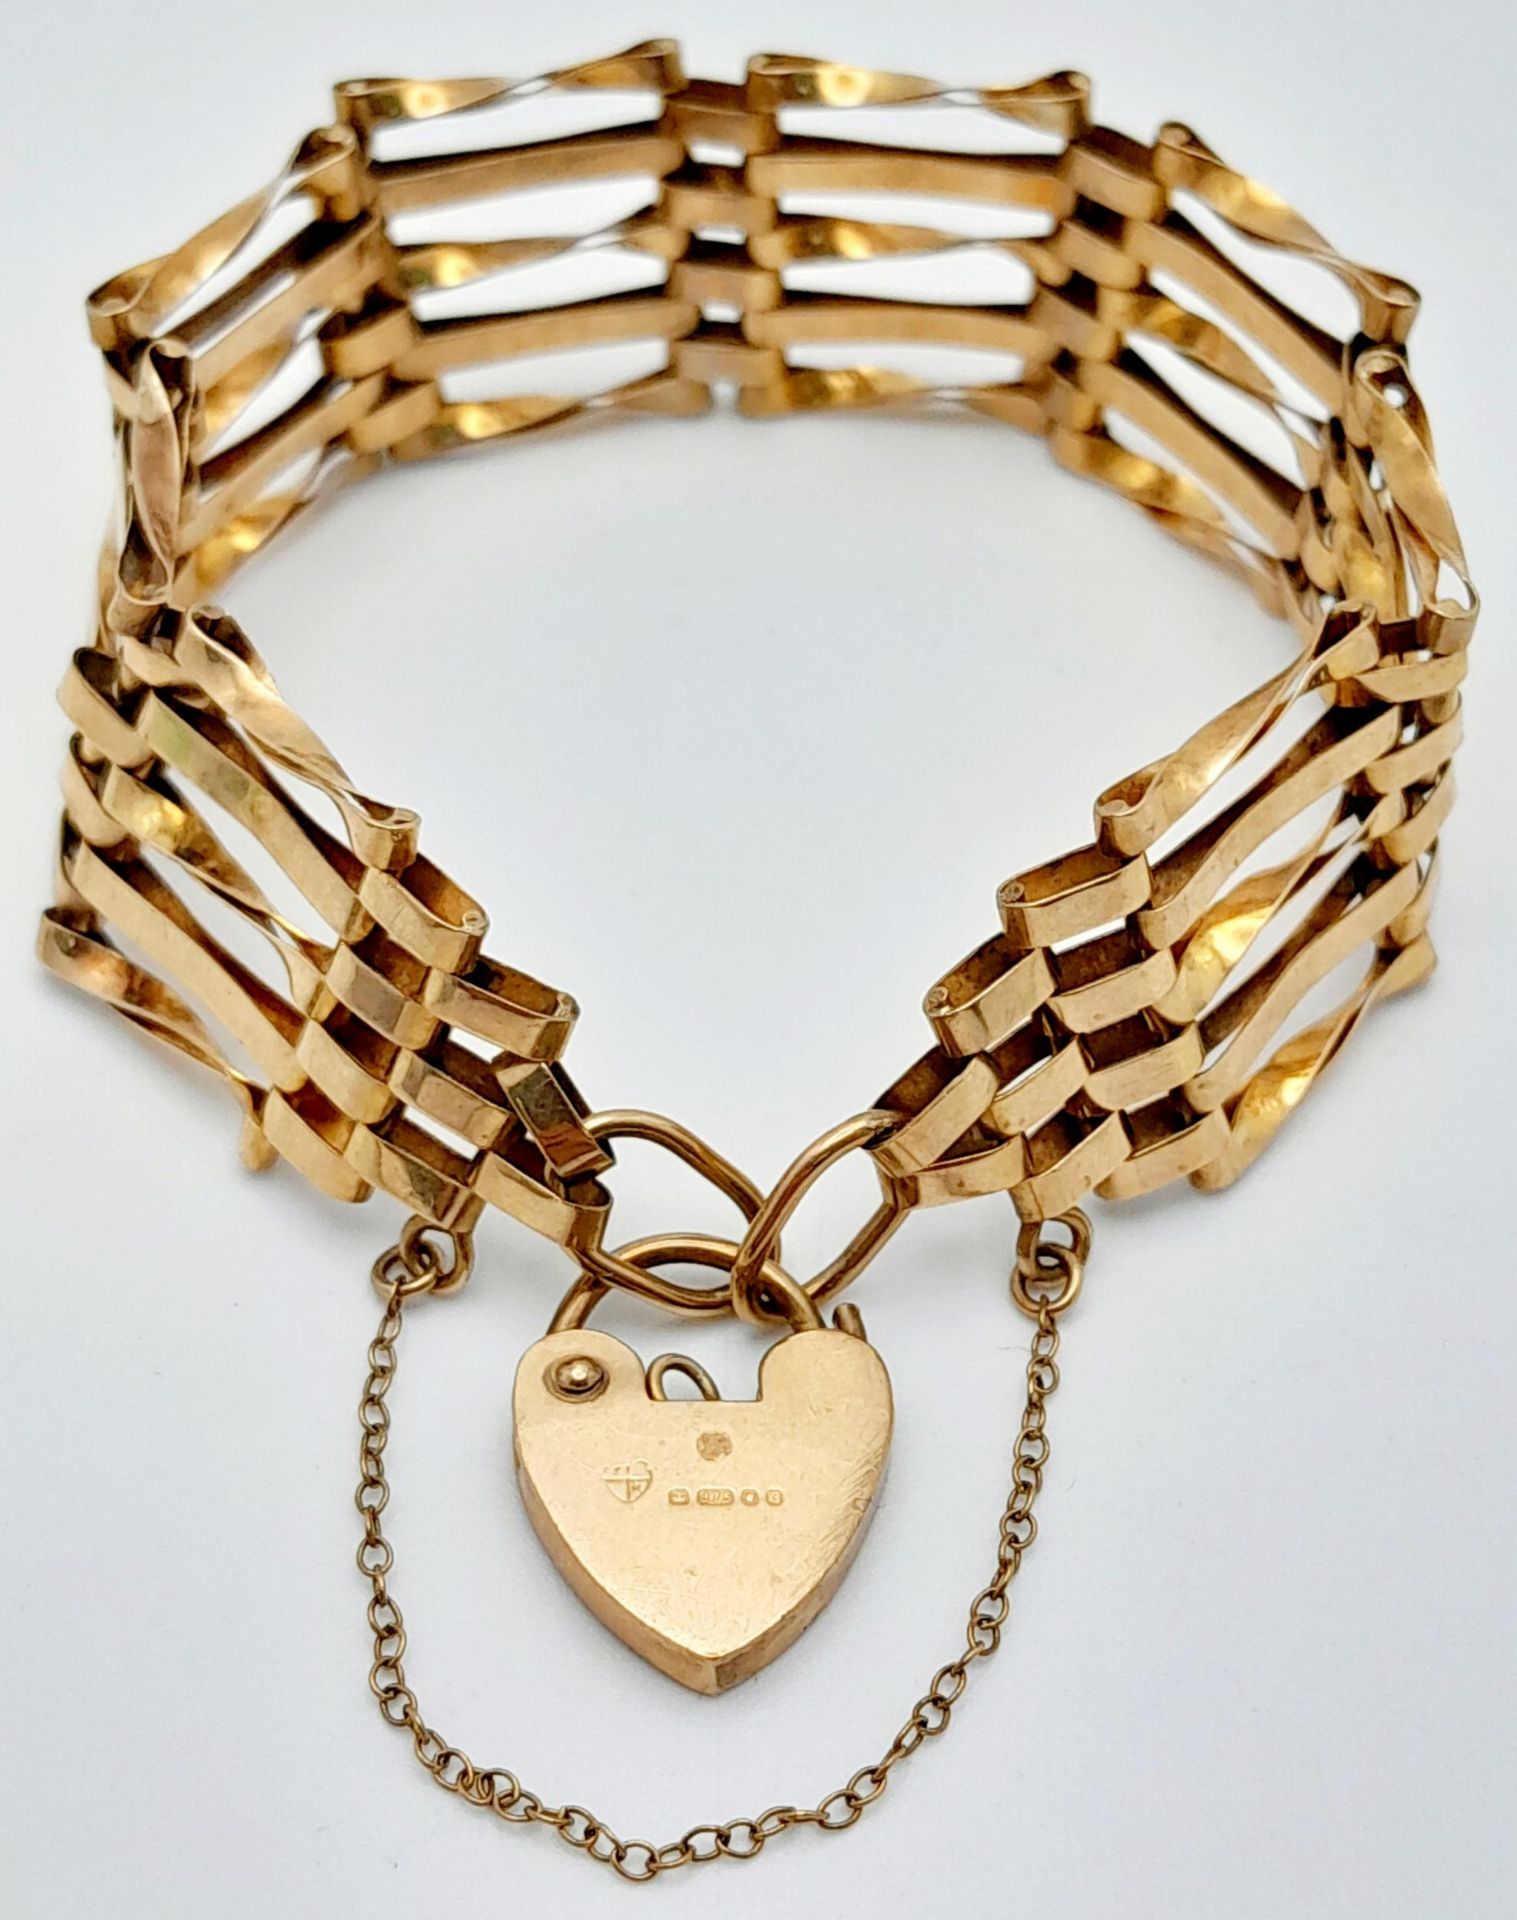 A Vintage 9K Yellow Gold Gate Bracelet with Heart Clasp. 16cm. 10.8g.